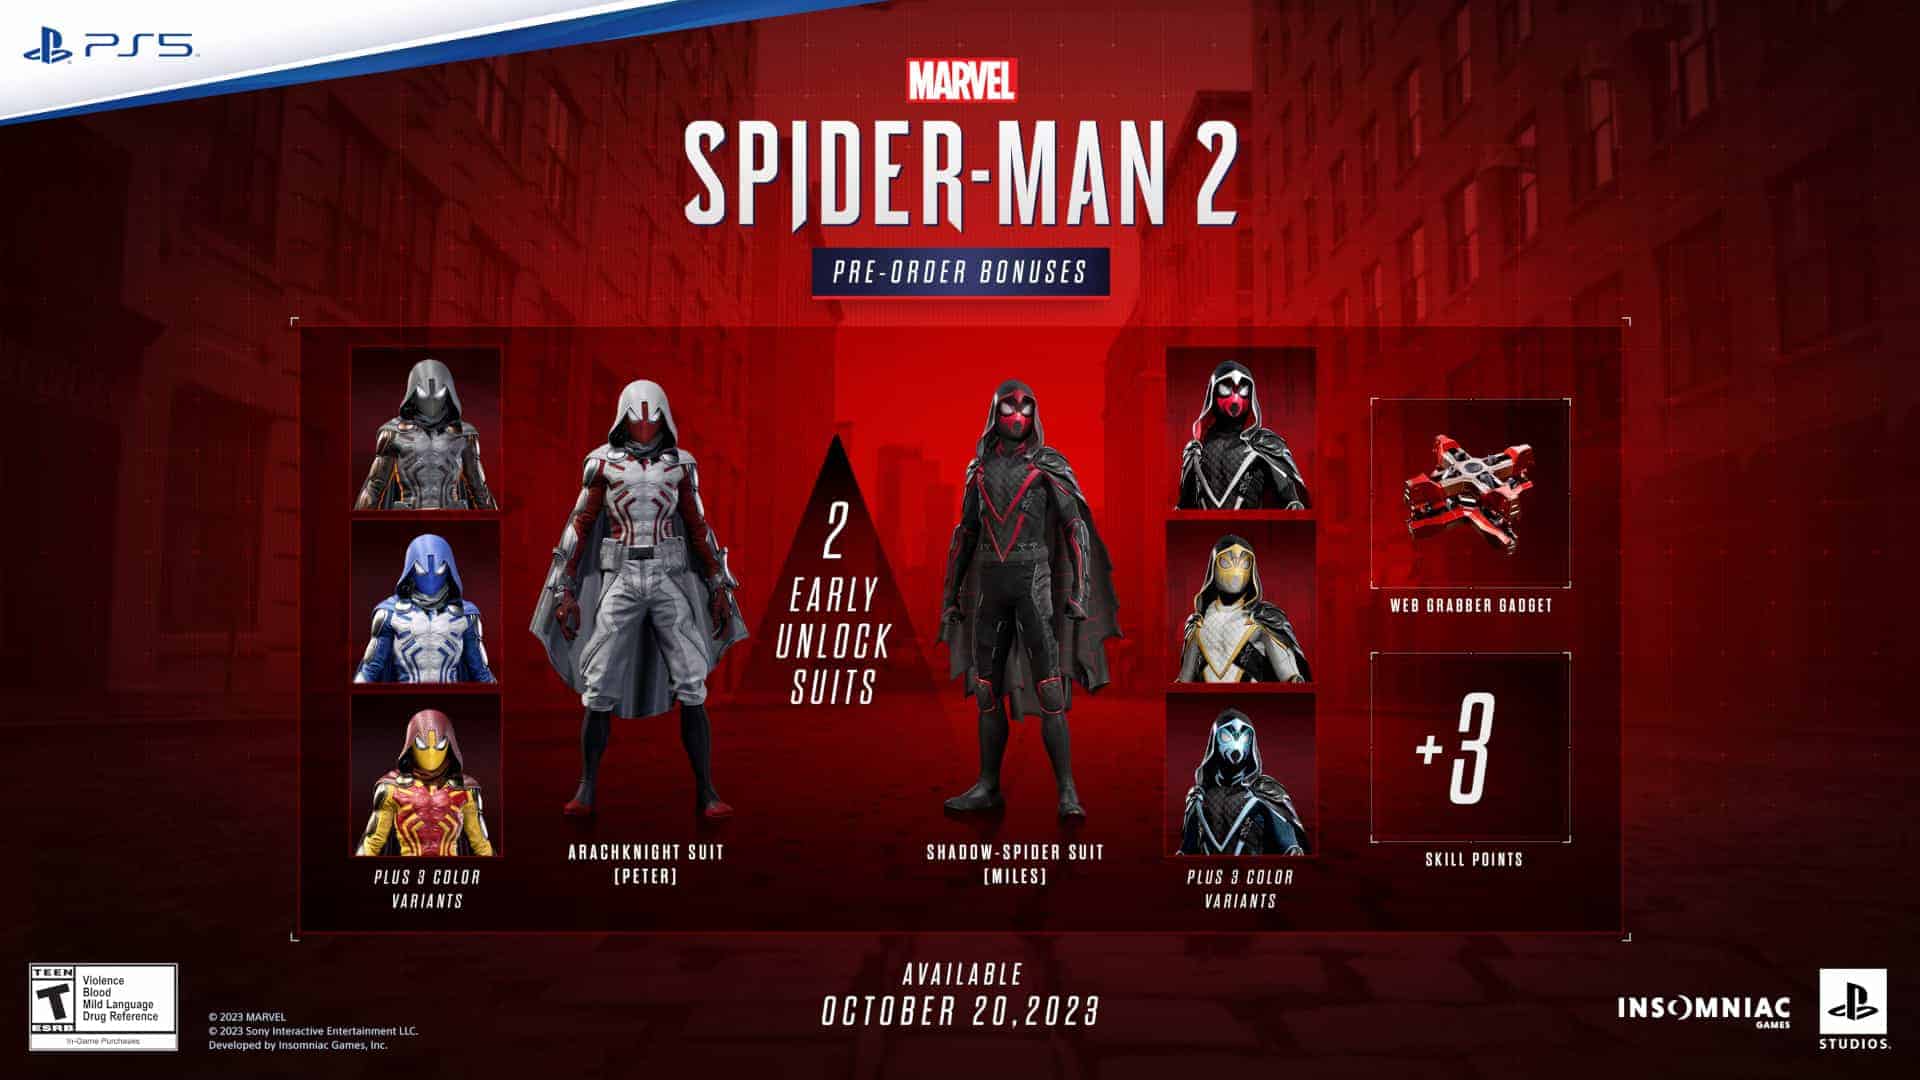 Marvel's Spider-Man 2 standard edition showing the early unlock suits and 3 skill points